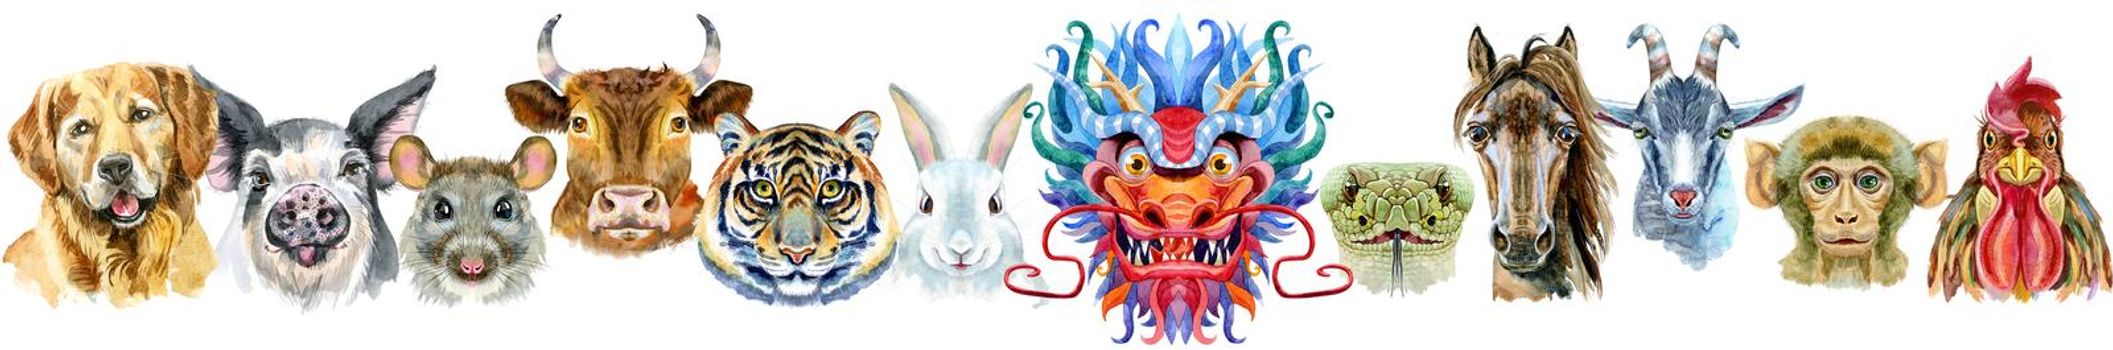 Colorful astrology set with drawings of twelve chinese zodiac animals isolated on white. Watercolor holiday collection of new year calendar and horoscope symbols.